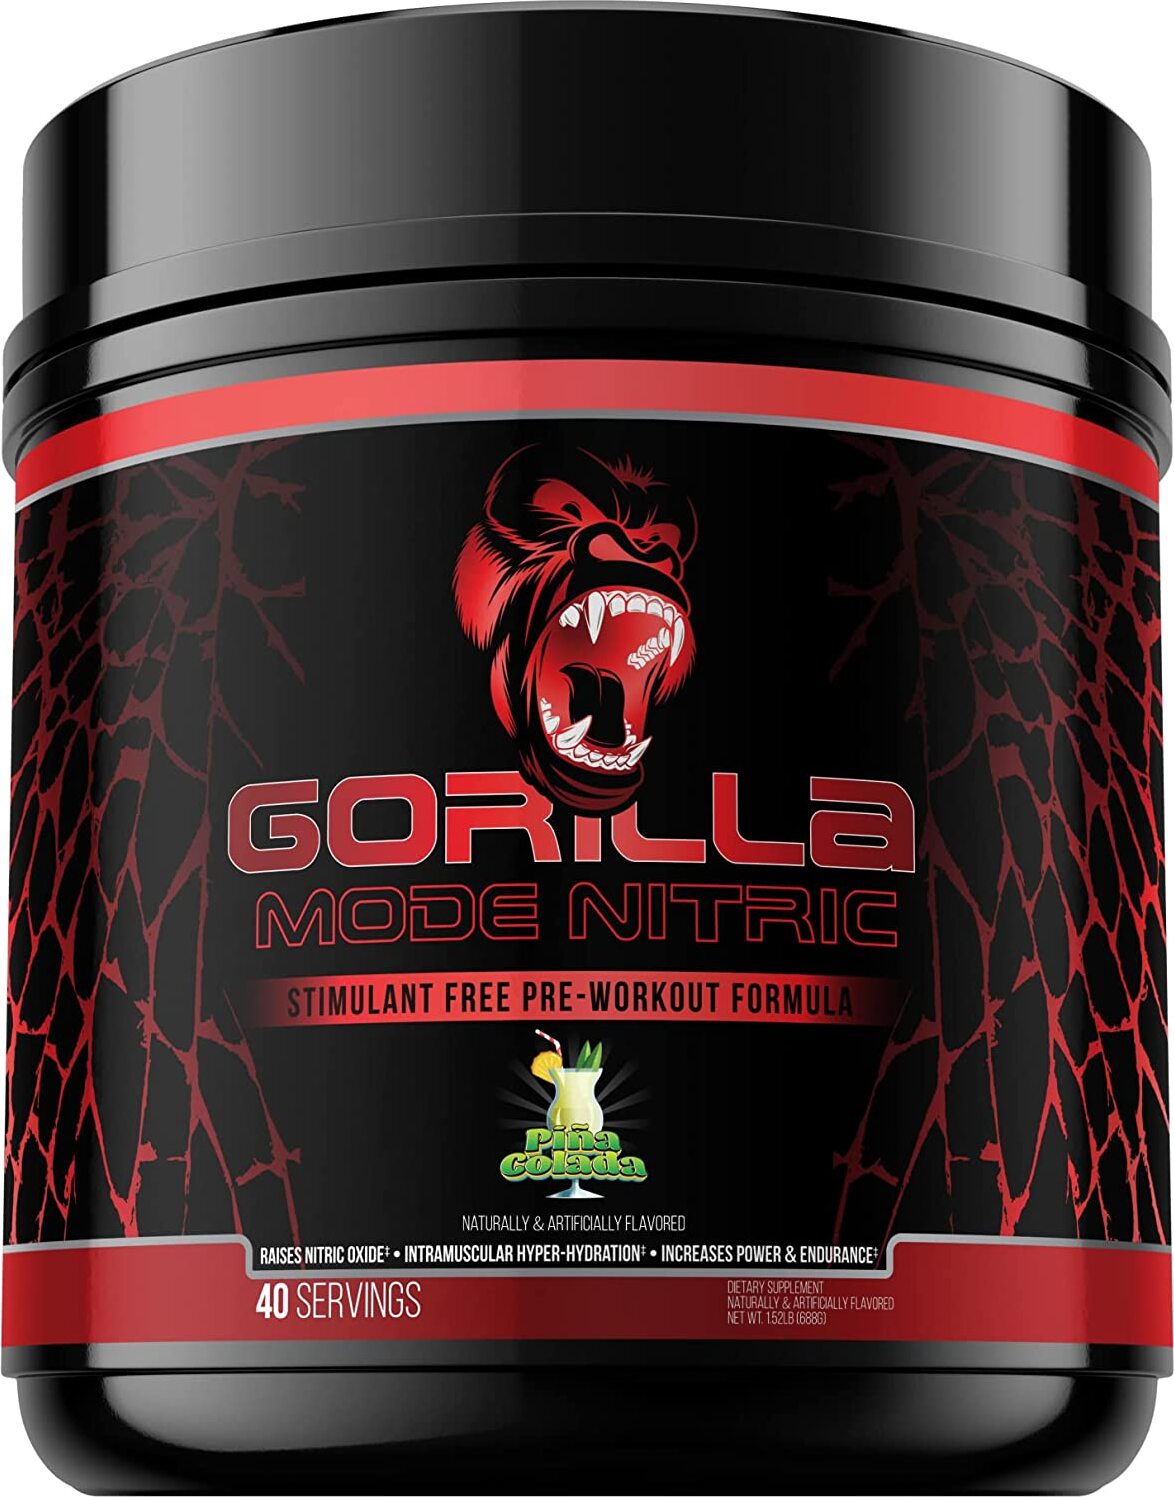 https://www.priceplow.com/static/images/products/gorilla-mind-gorilla-mode-nitric.jpg